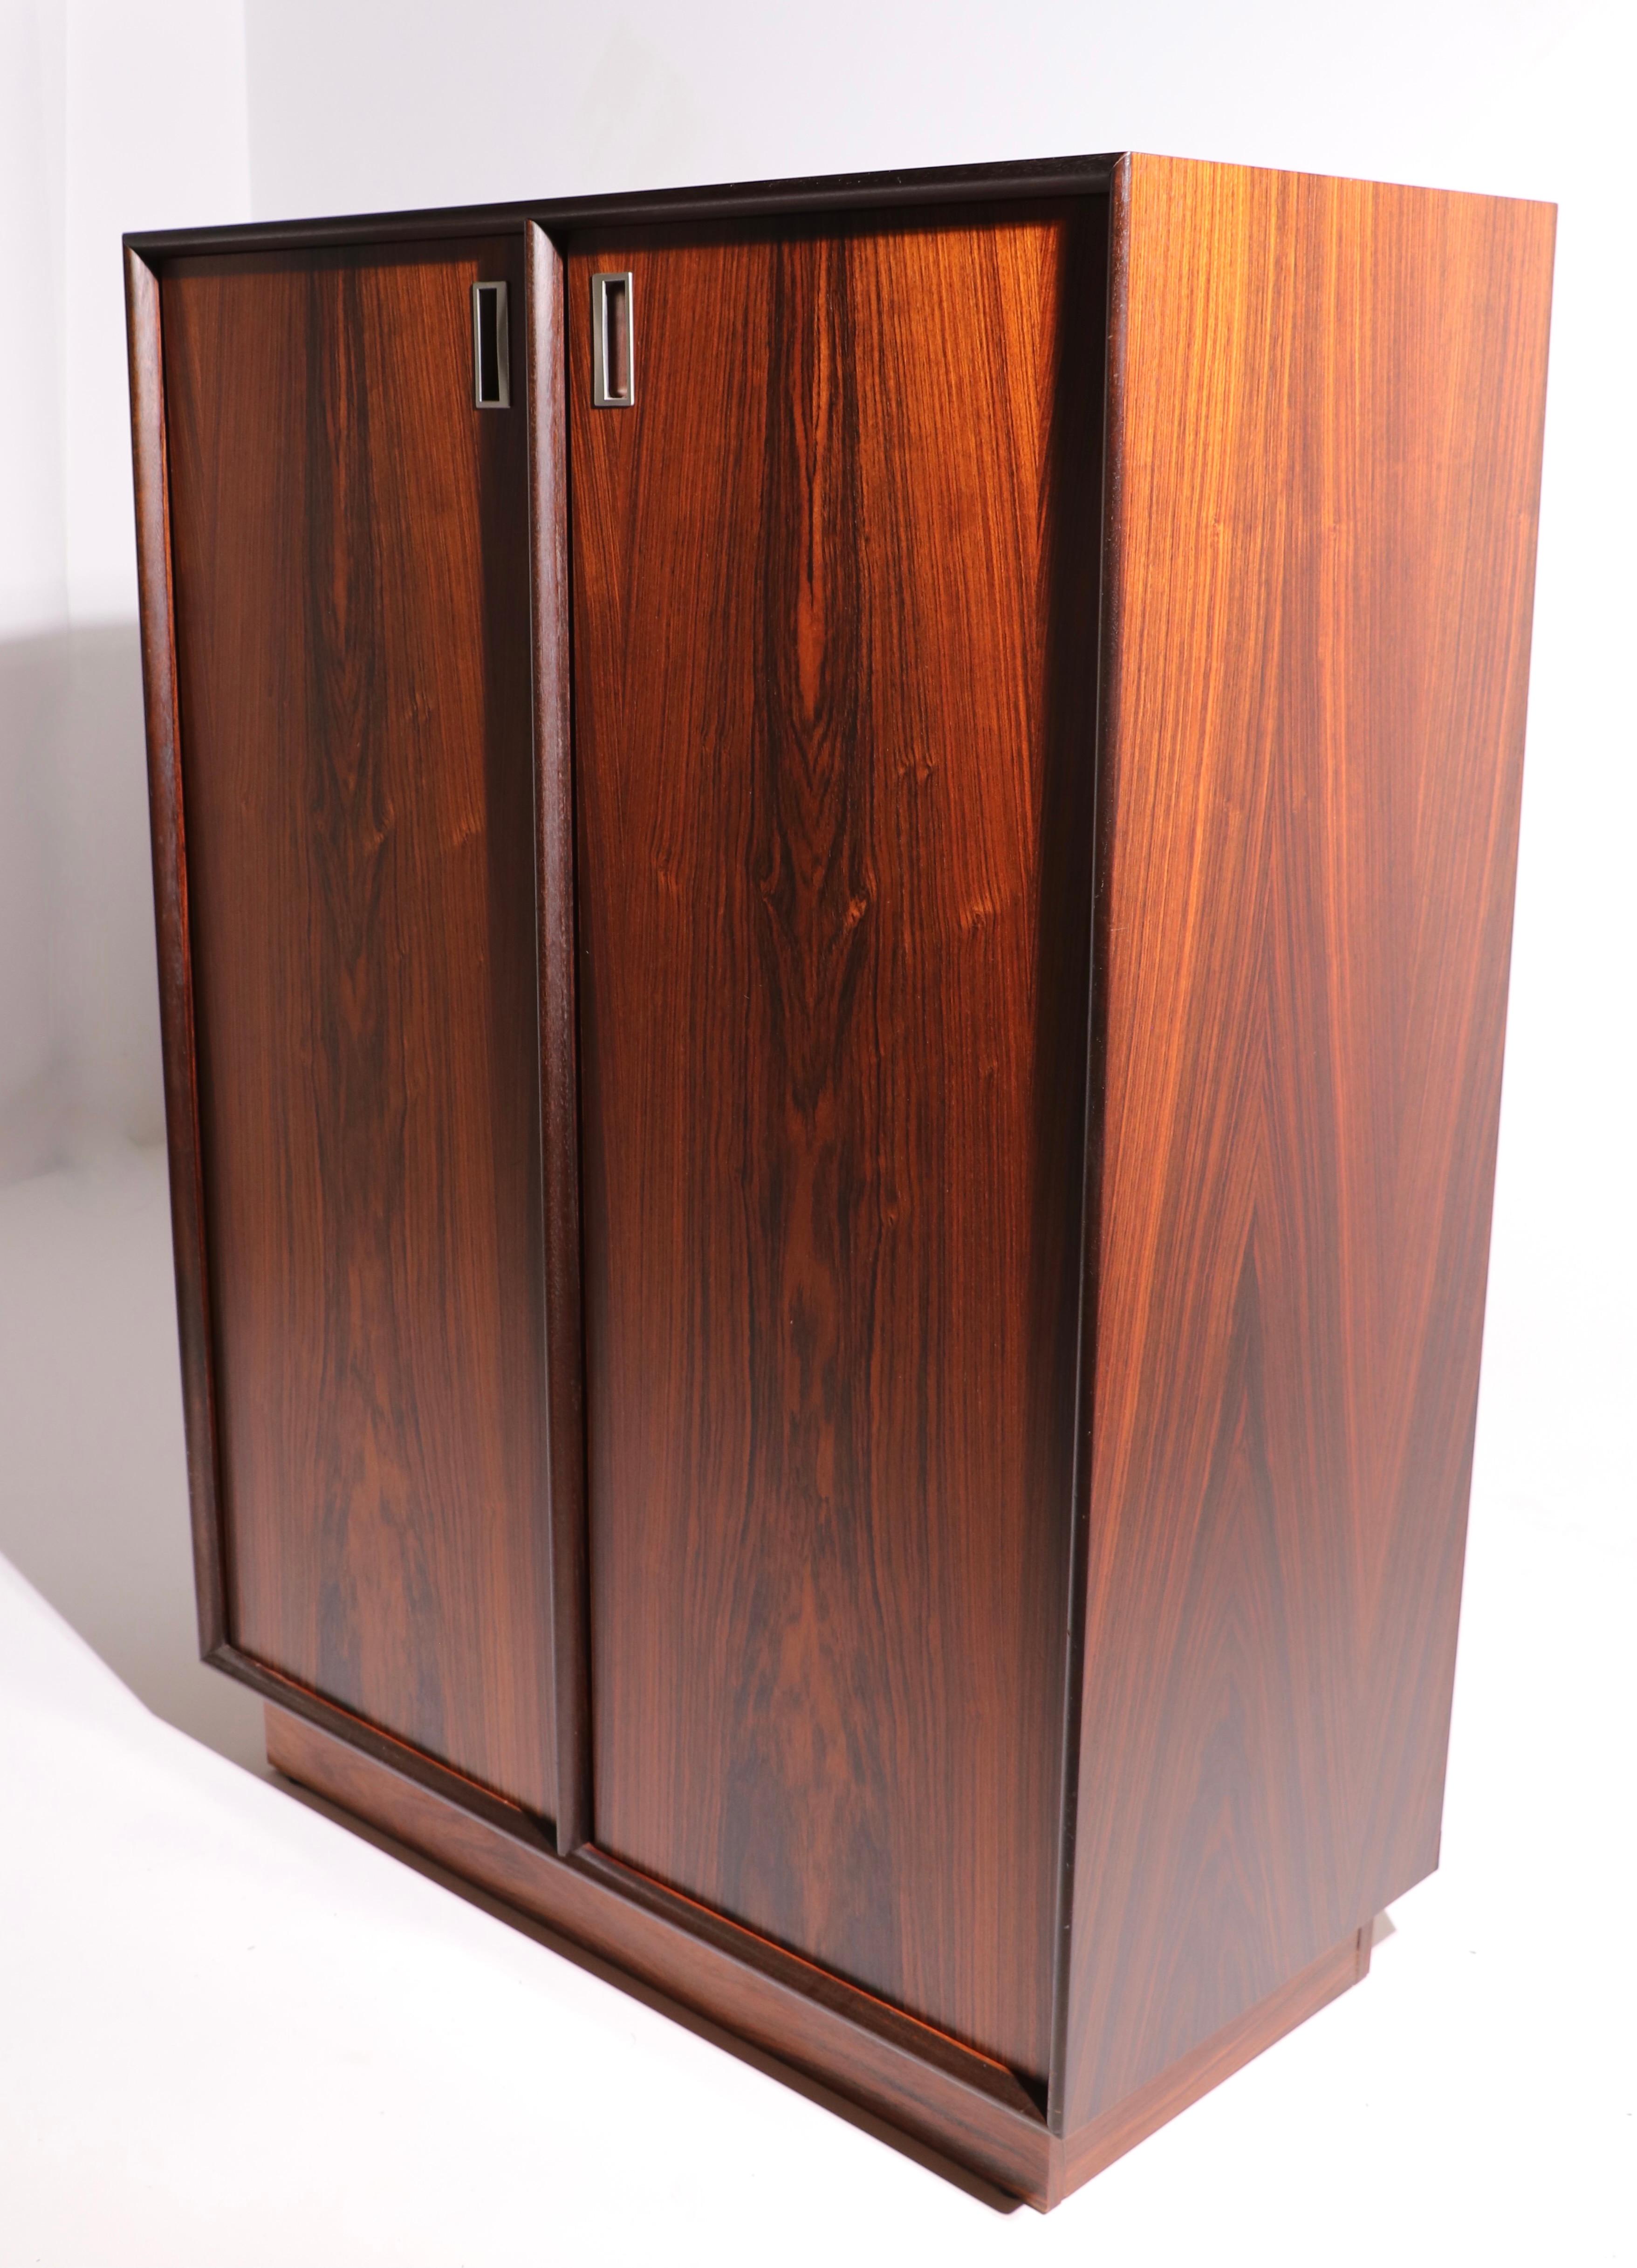 Stunning rosewood chiferobe, amoire having two doors, which open to shelved storage and interior drawers. The wardrobe is in excellent , original, clean and ready to use condition. Please view the companion dresser, and nightstands we have listed